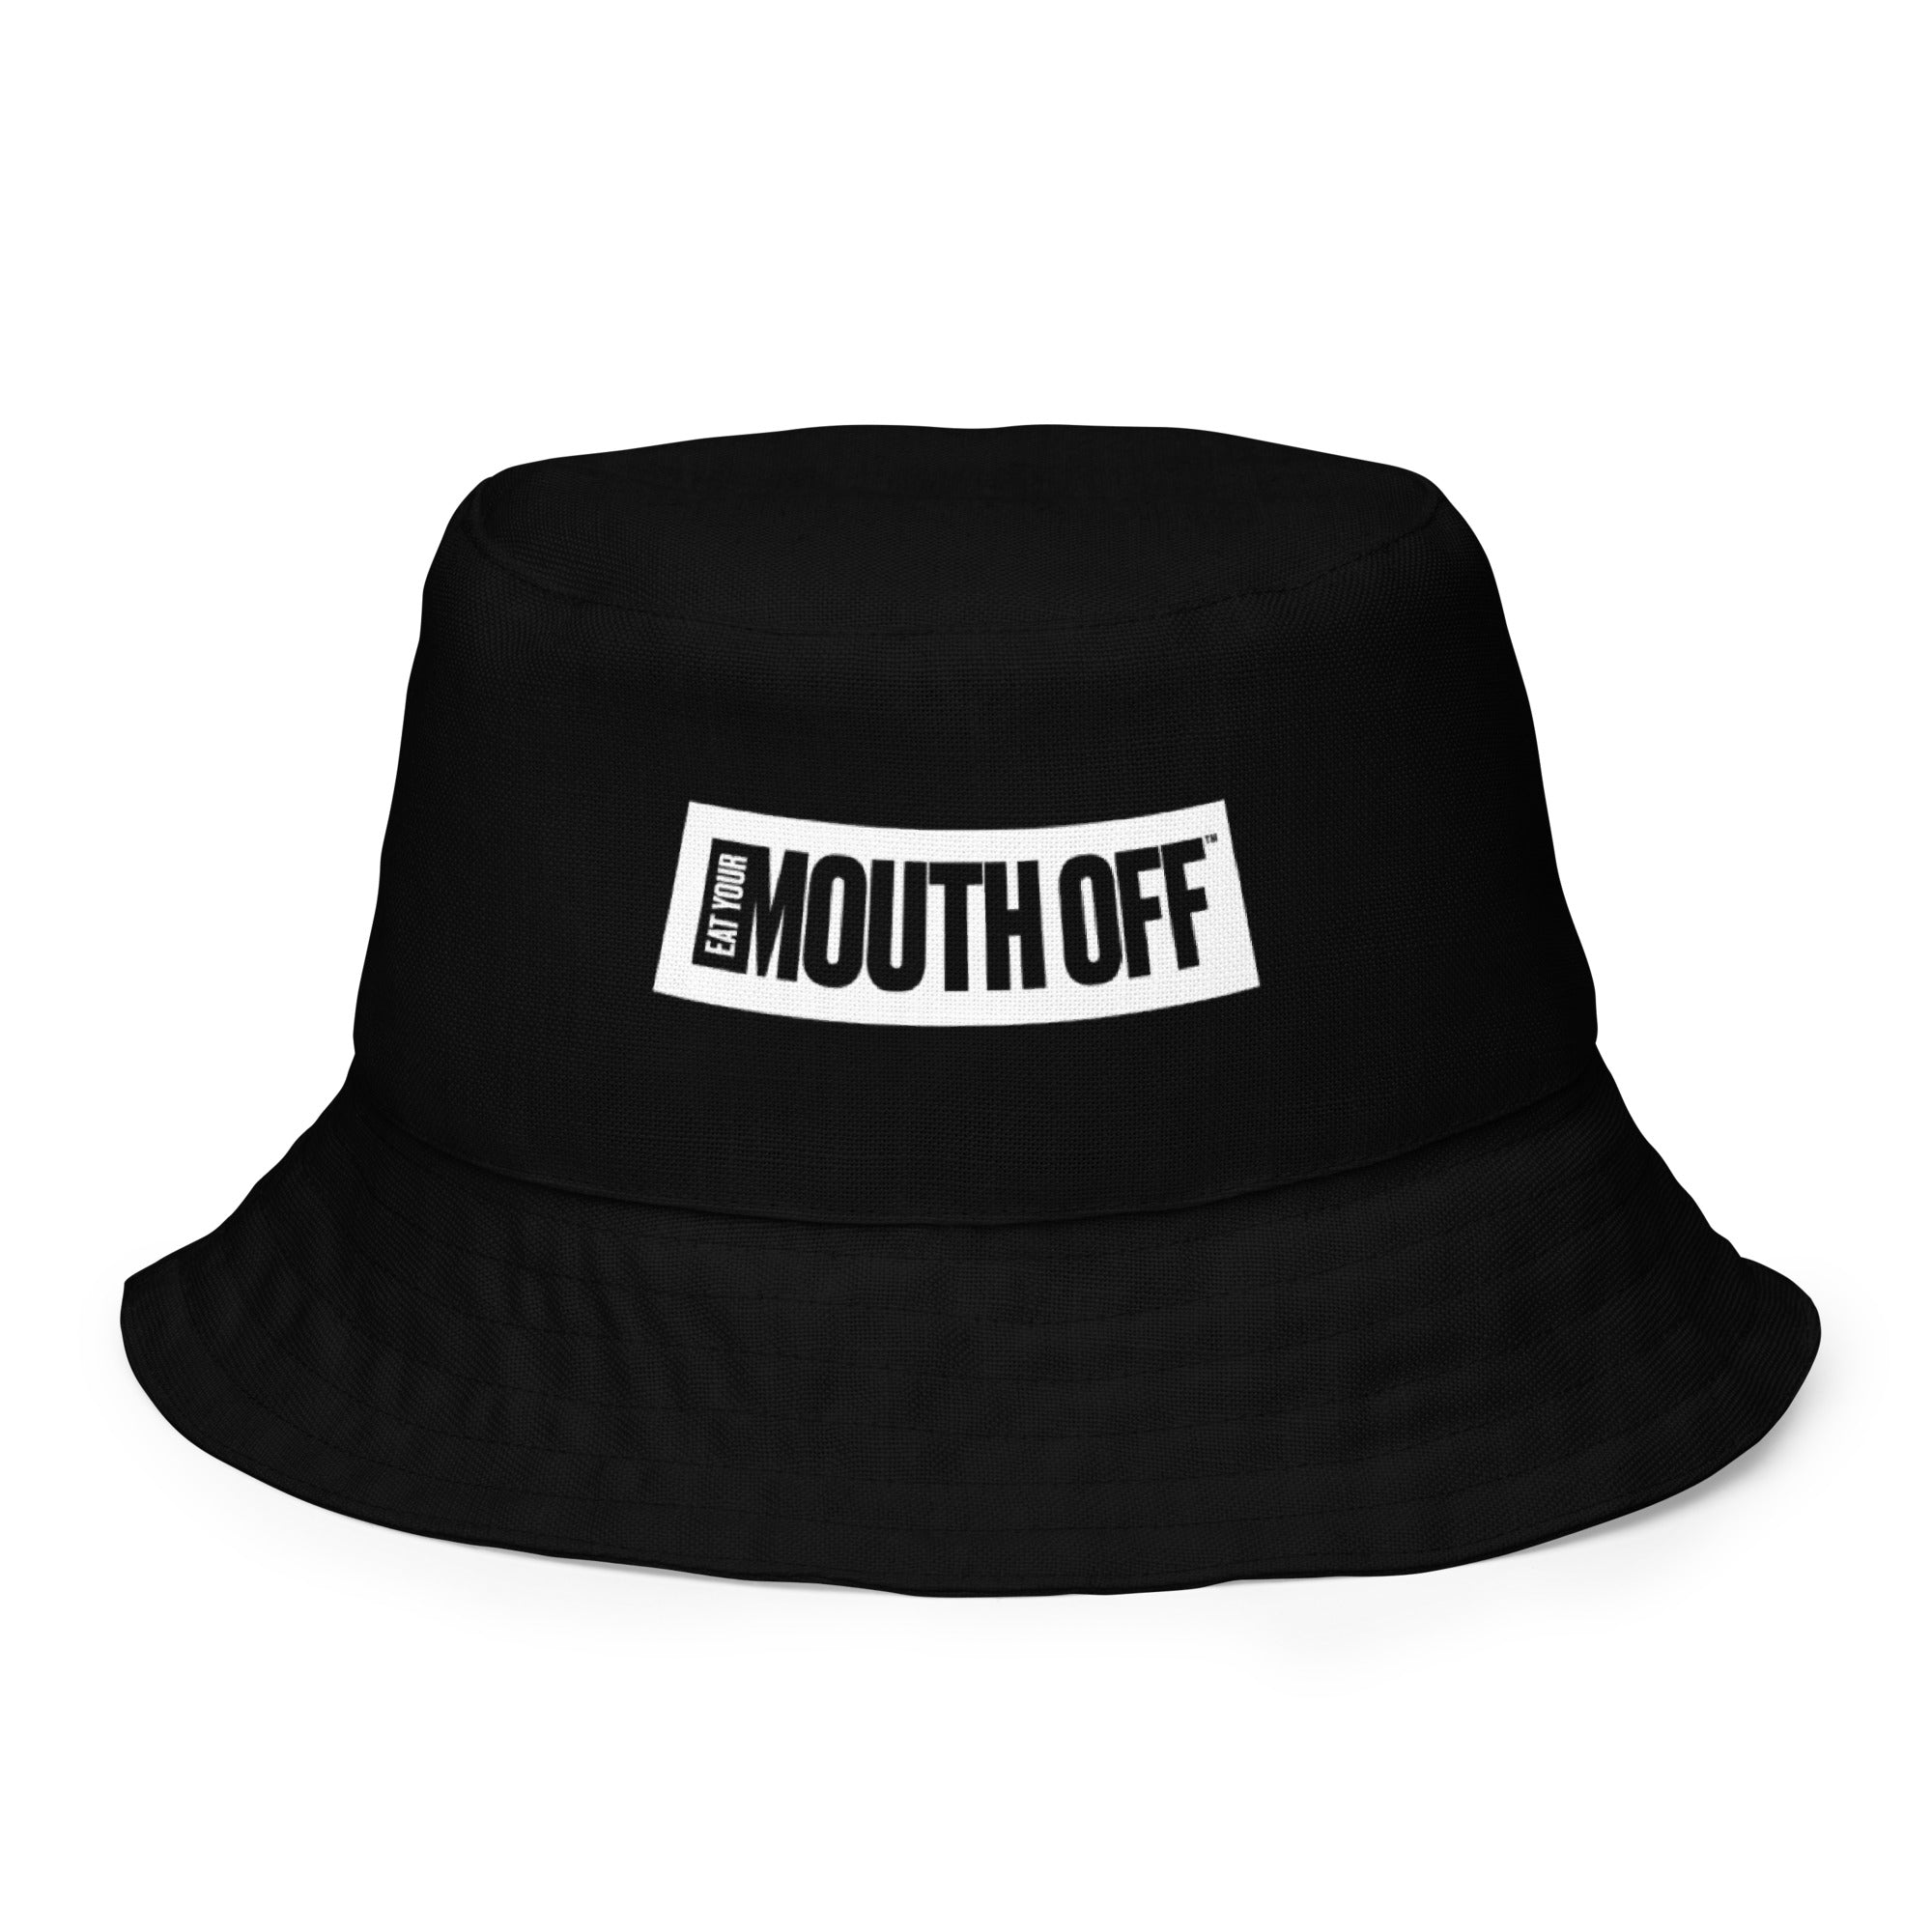 Eat Your Mouth Off™ Chocolate Bucket Hat